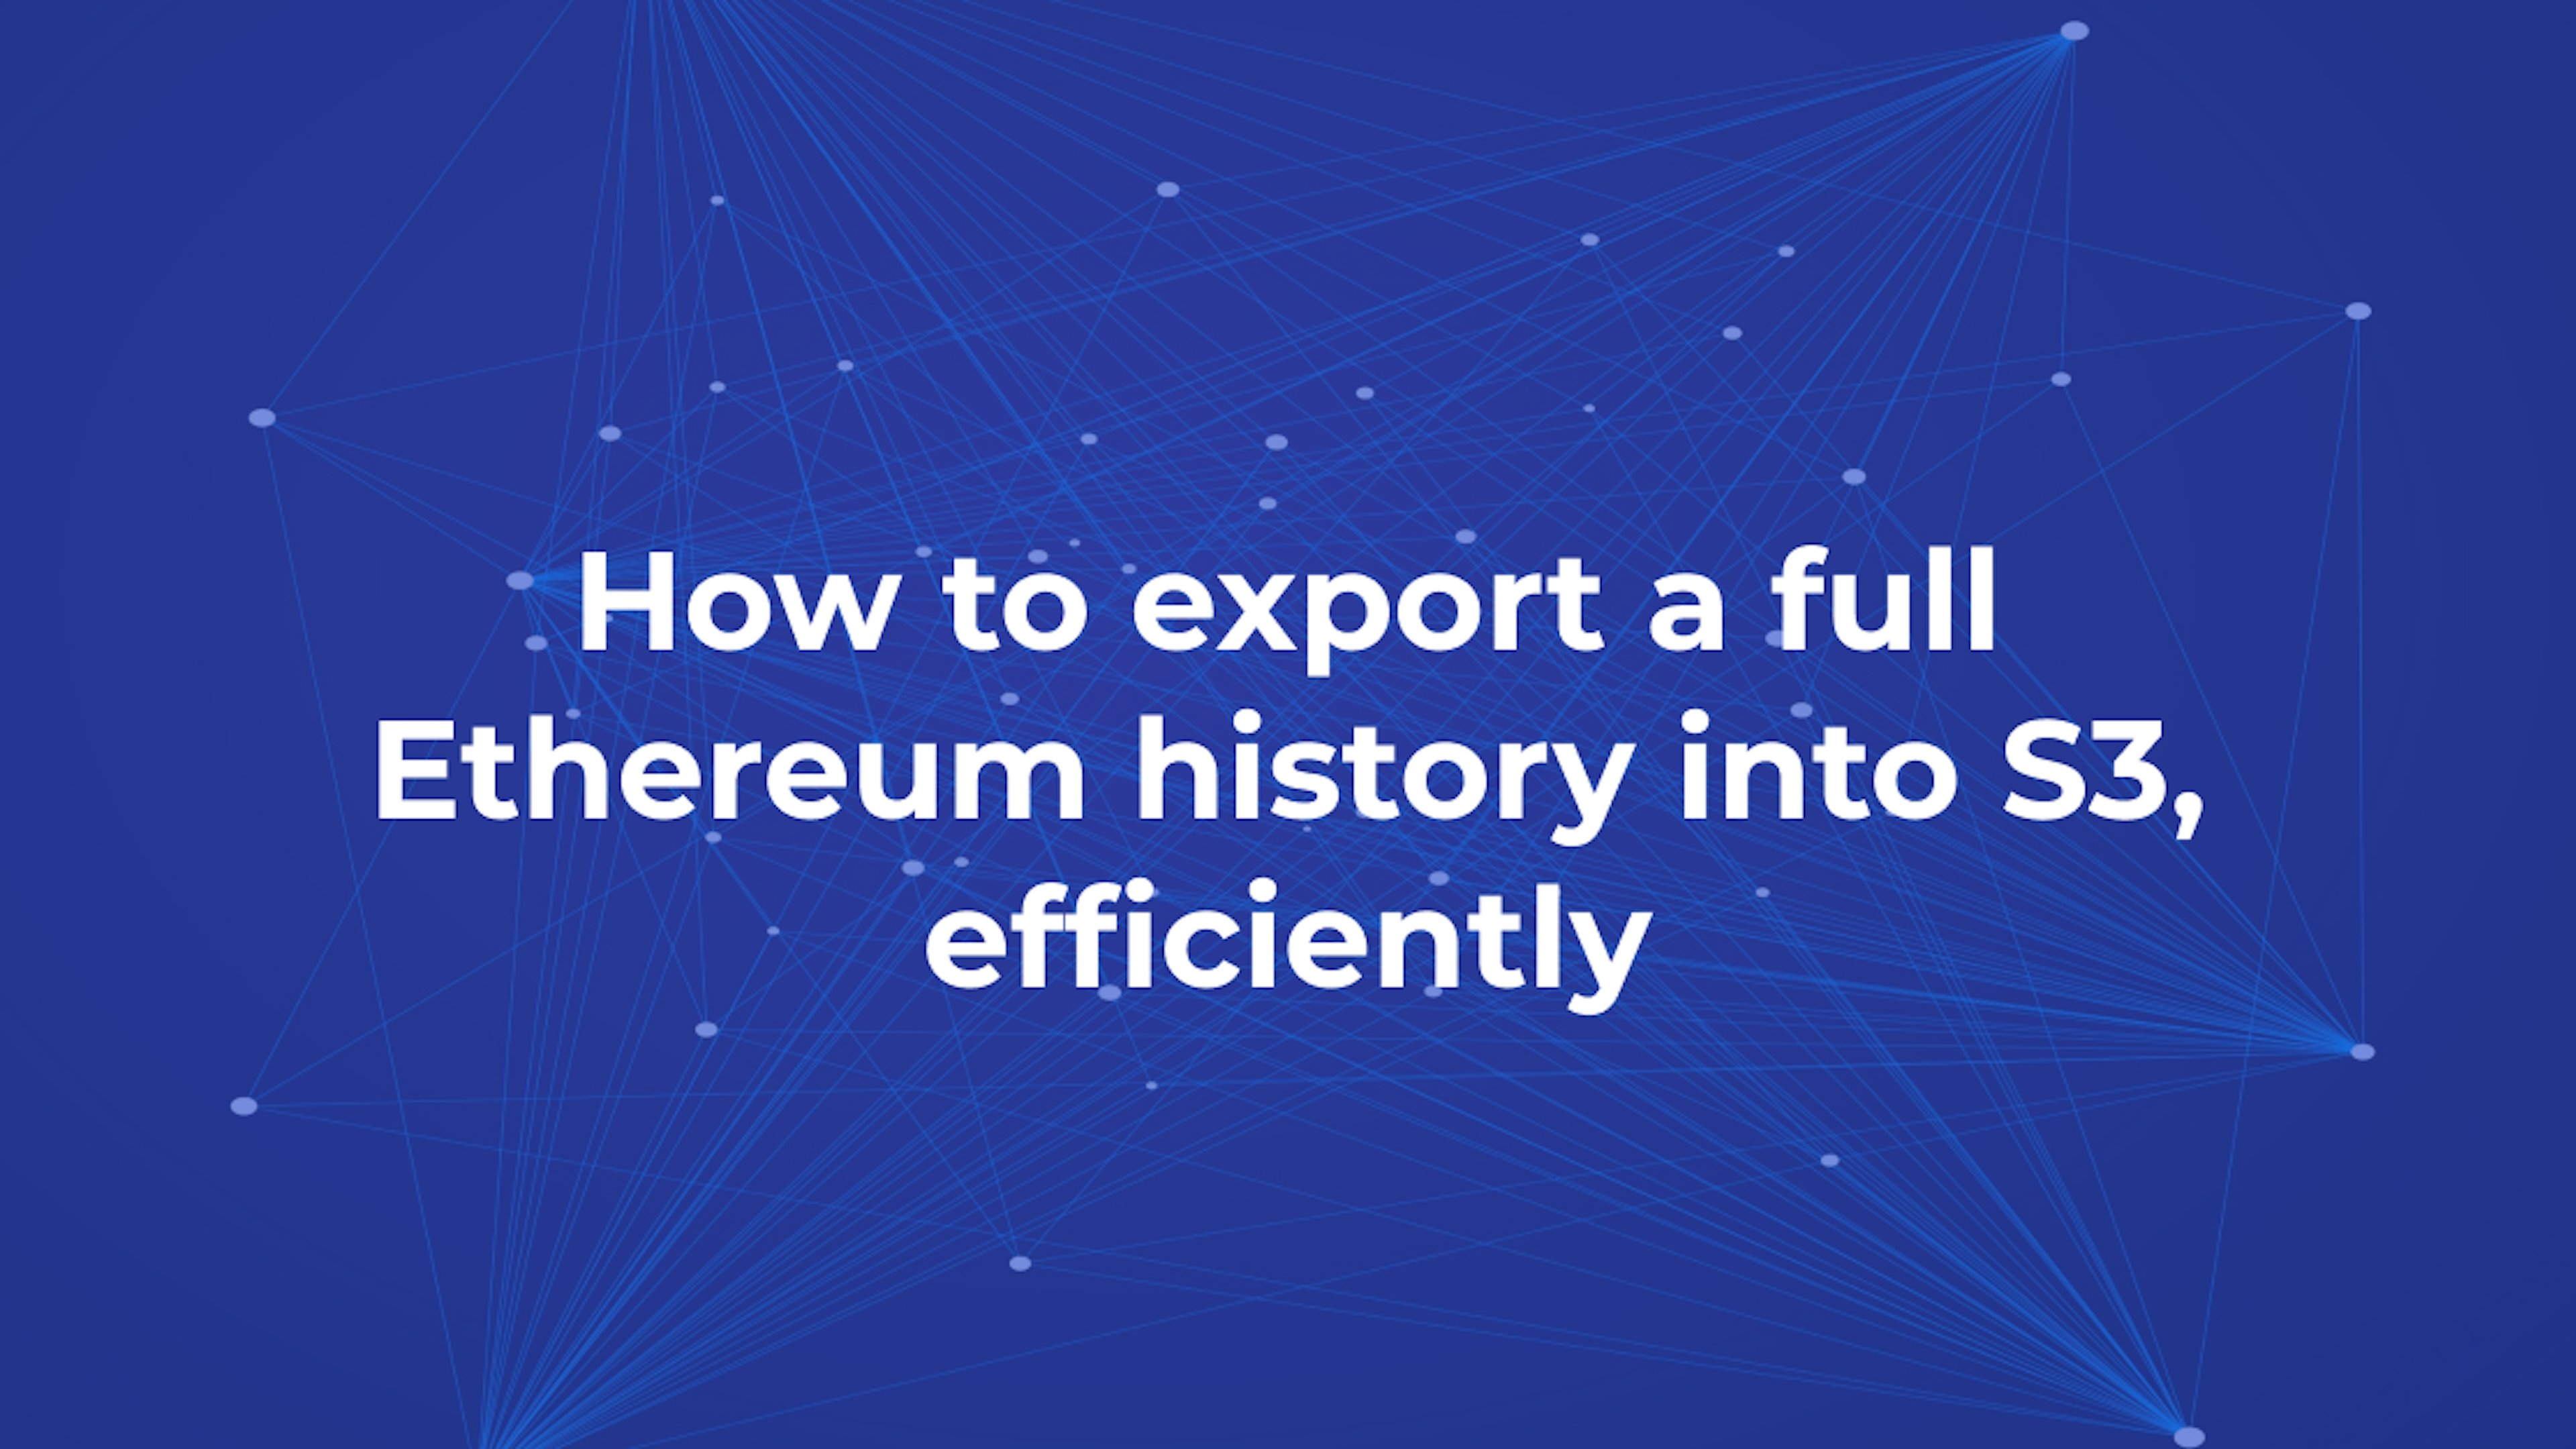 How to export a full Ethereum history into S3, efficiently